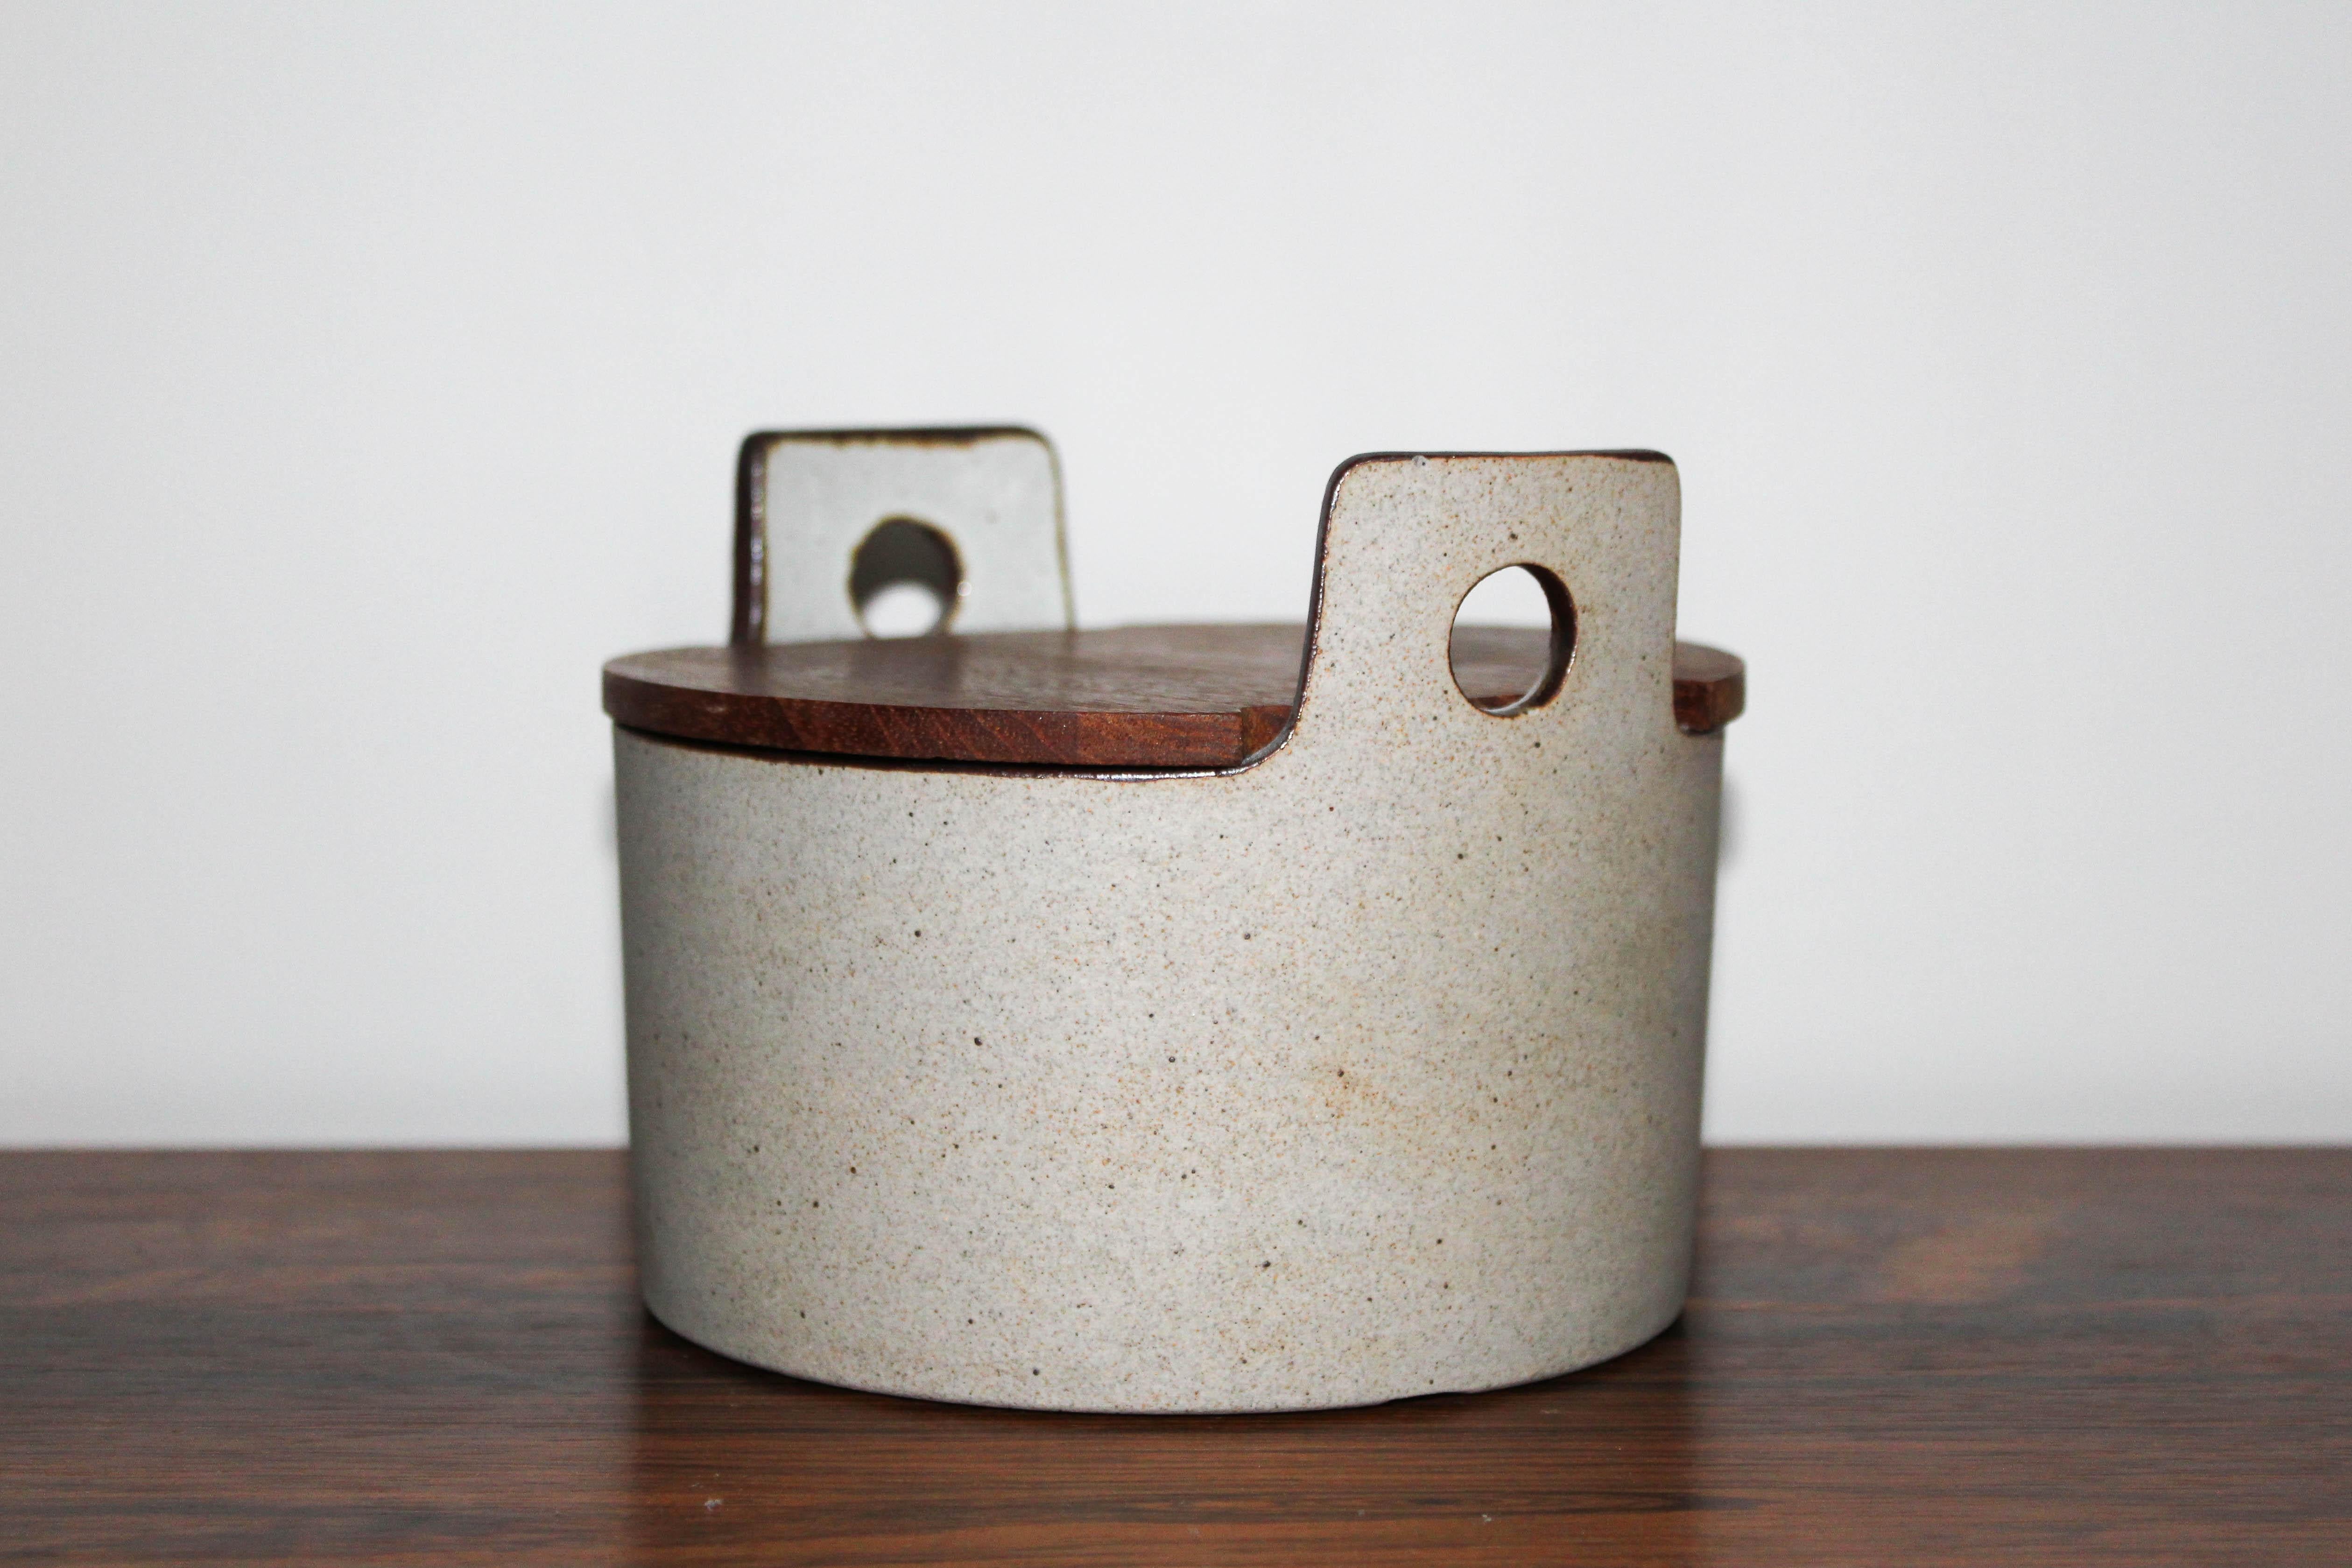 Studio made ceramic bowl with teak lid by Knabstrup Atelier. Very good vintage condition with minor signs of usage.